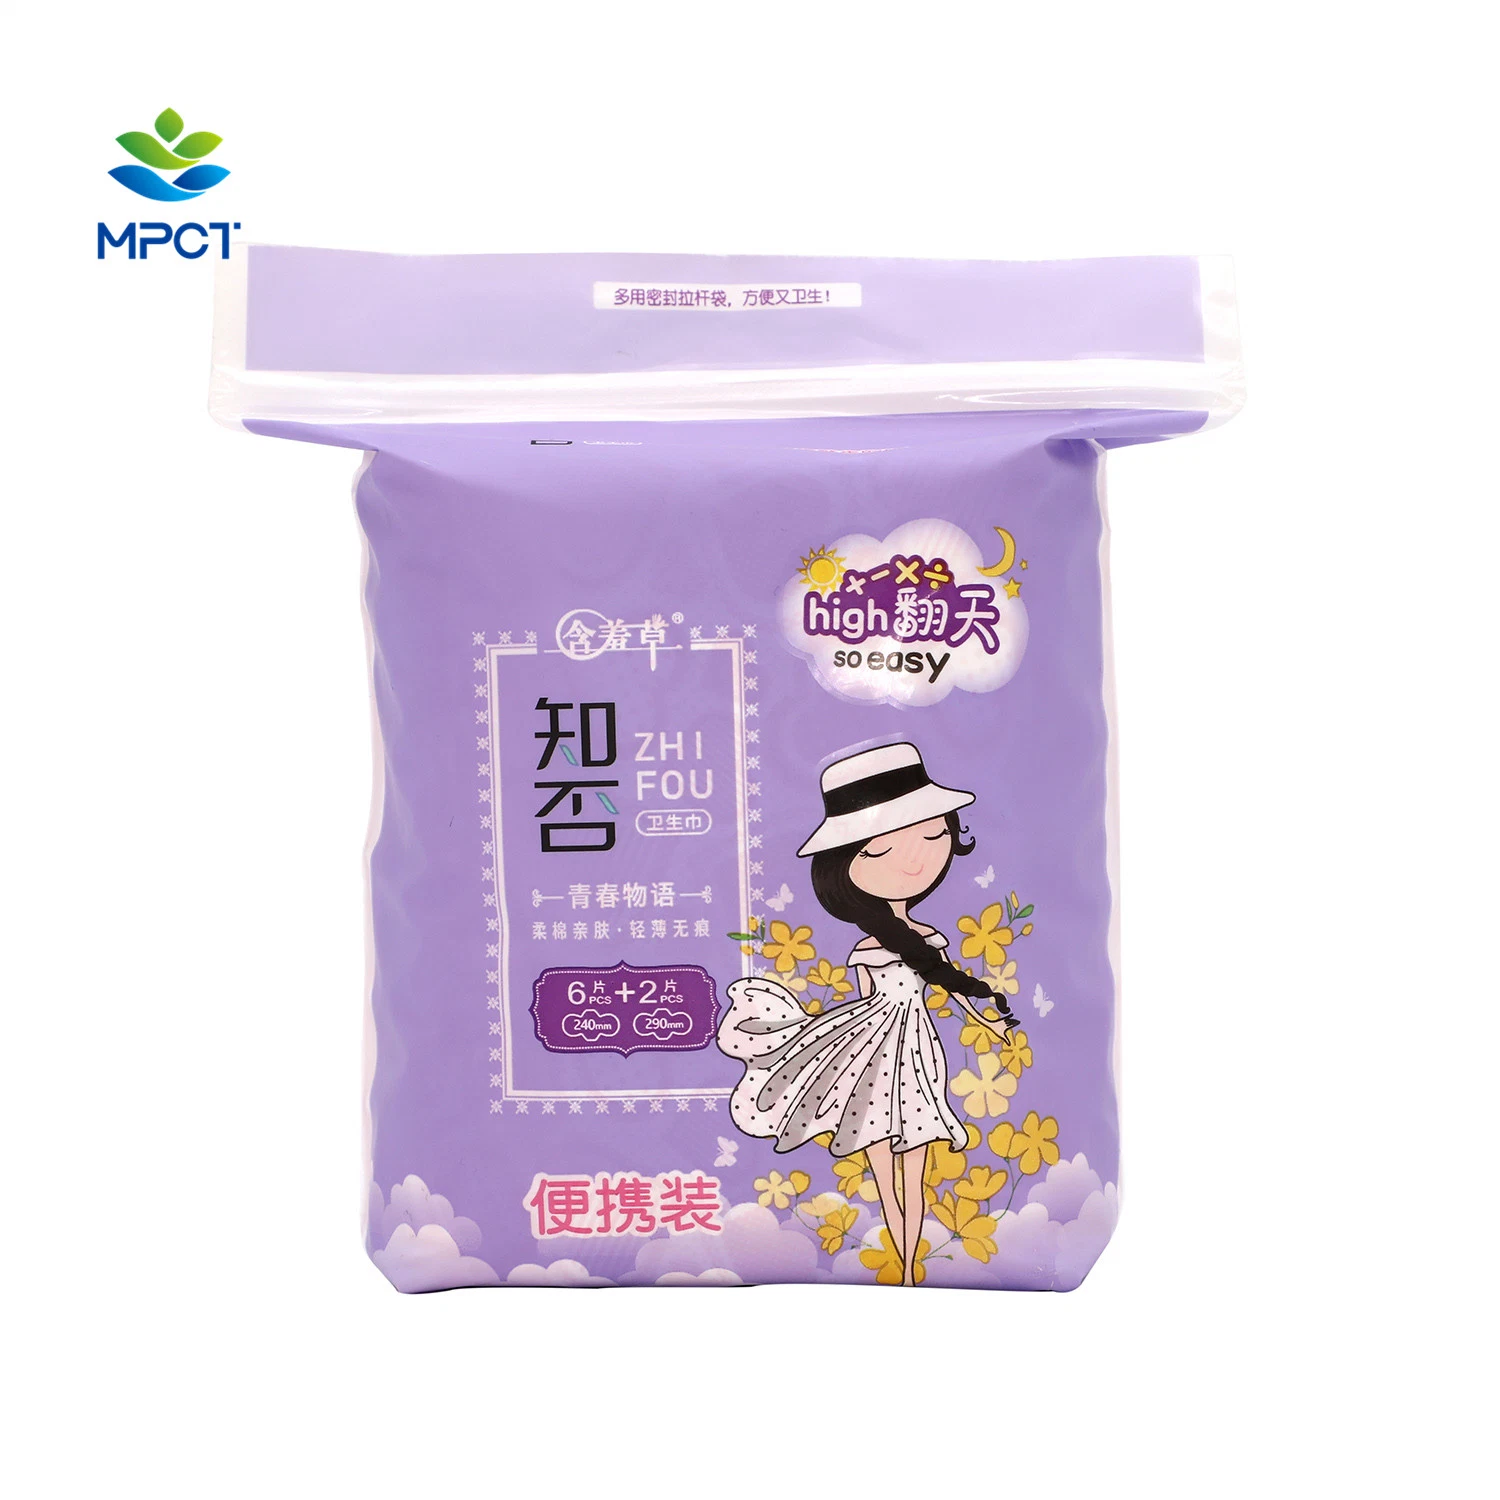 Slim Sanitary Napkins Quickly Absorb / Functional Chips / Aunt Towel / Menstrual Care Products